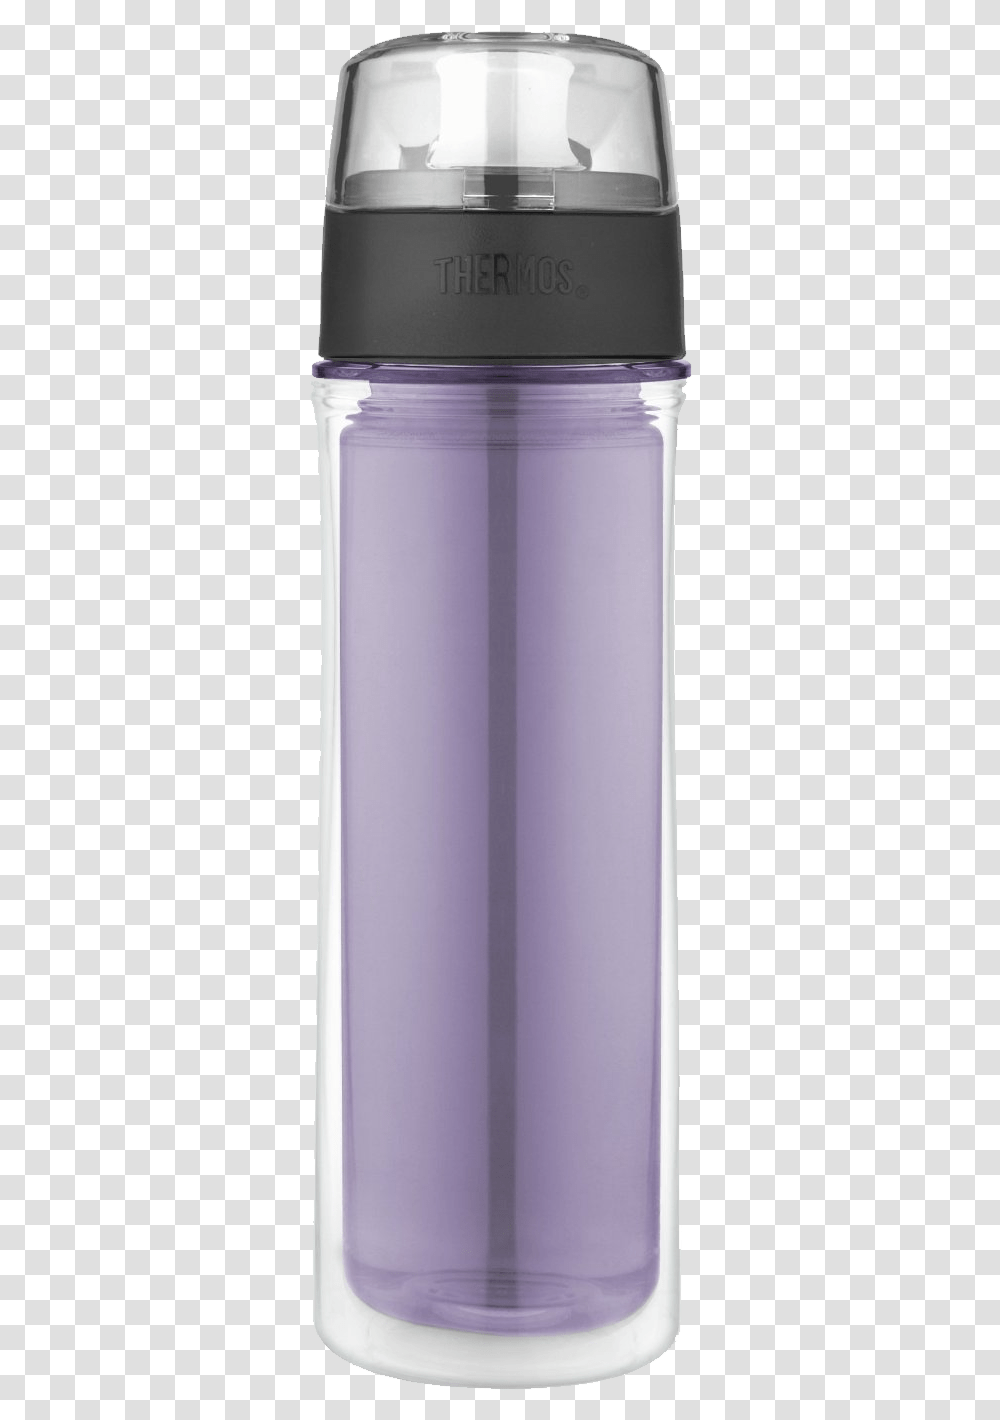 Thermos Double Wall Hydration Water Bottle Tritan, Shaker, Aluminium, Electronics, Tin Transparent Png